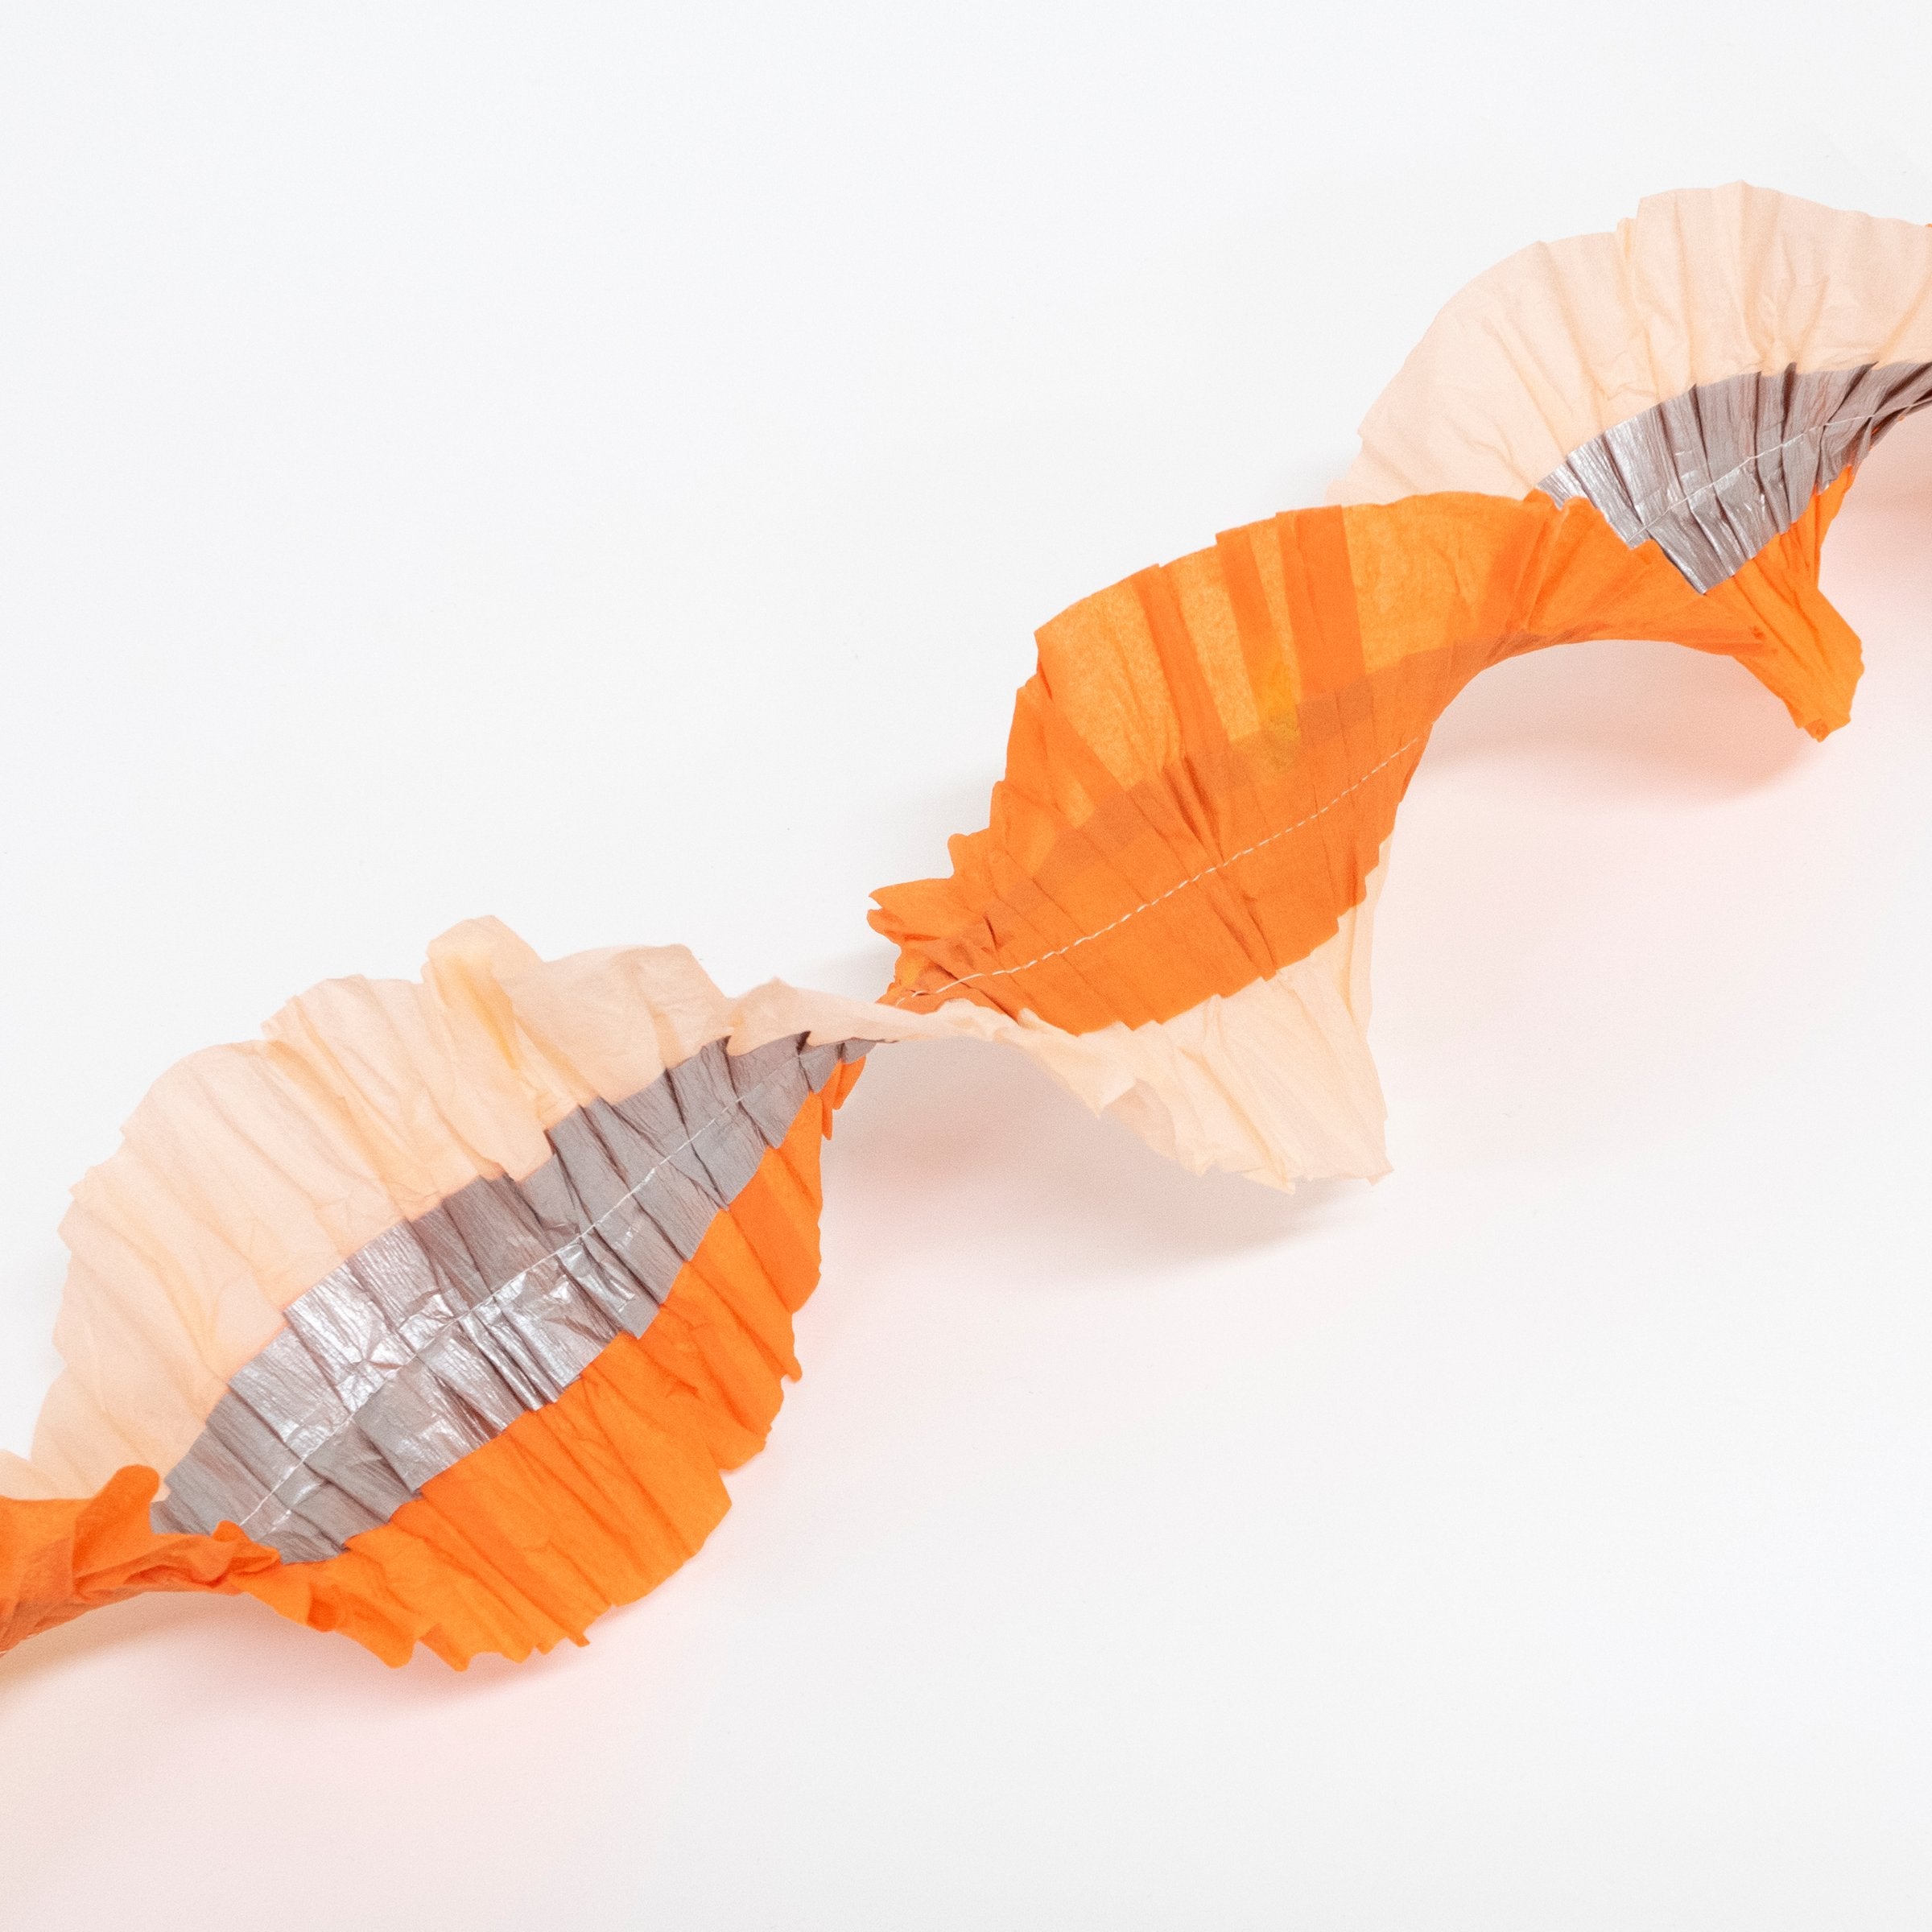 Our pastel party streamers are a stylish way to add colour to your Halloween party decorations.